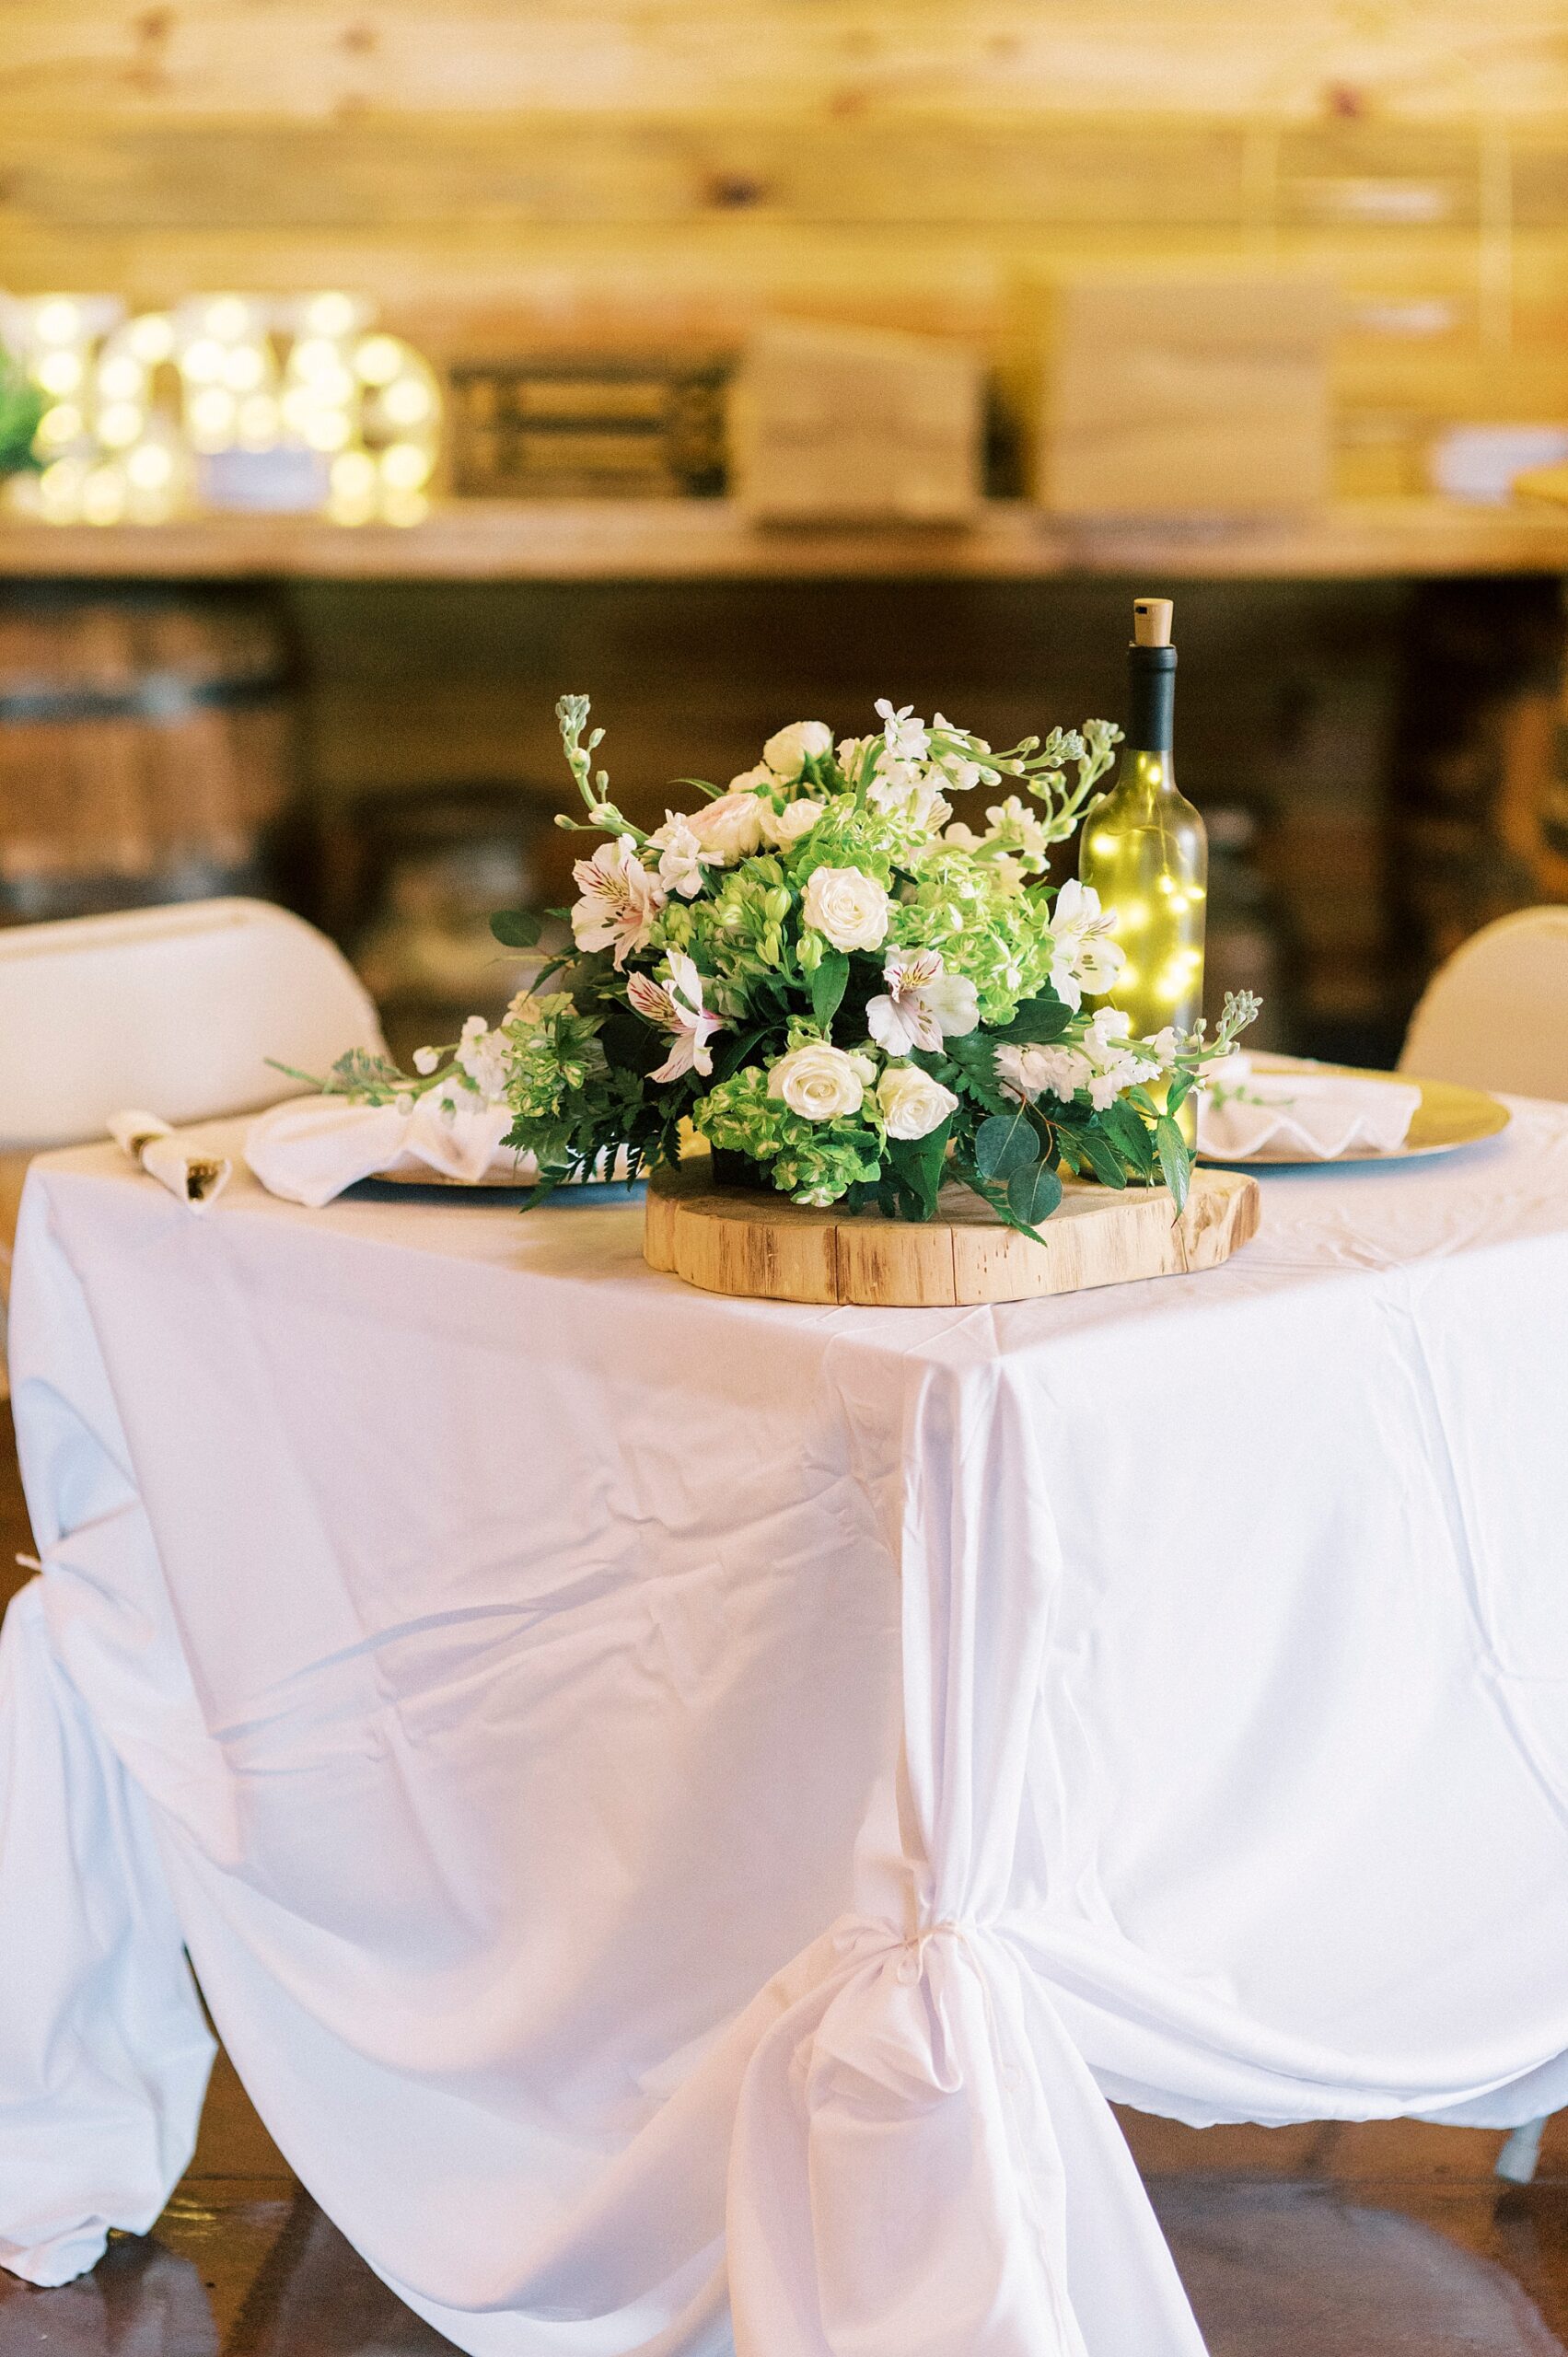 sweetheart table with green and white floral display on wooden charger 